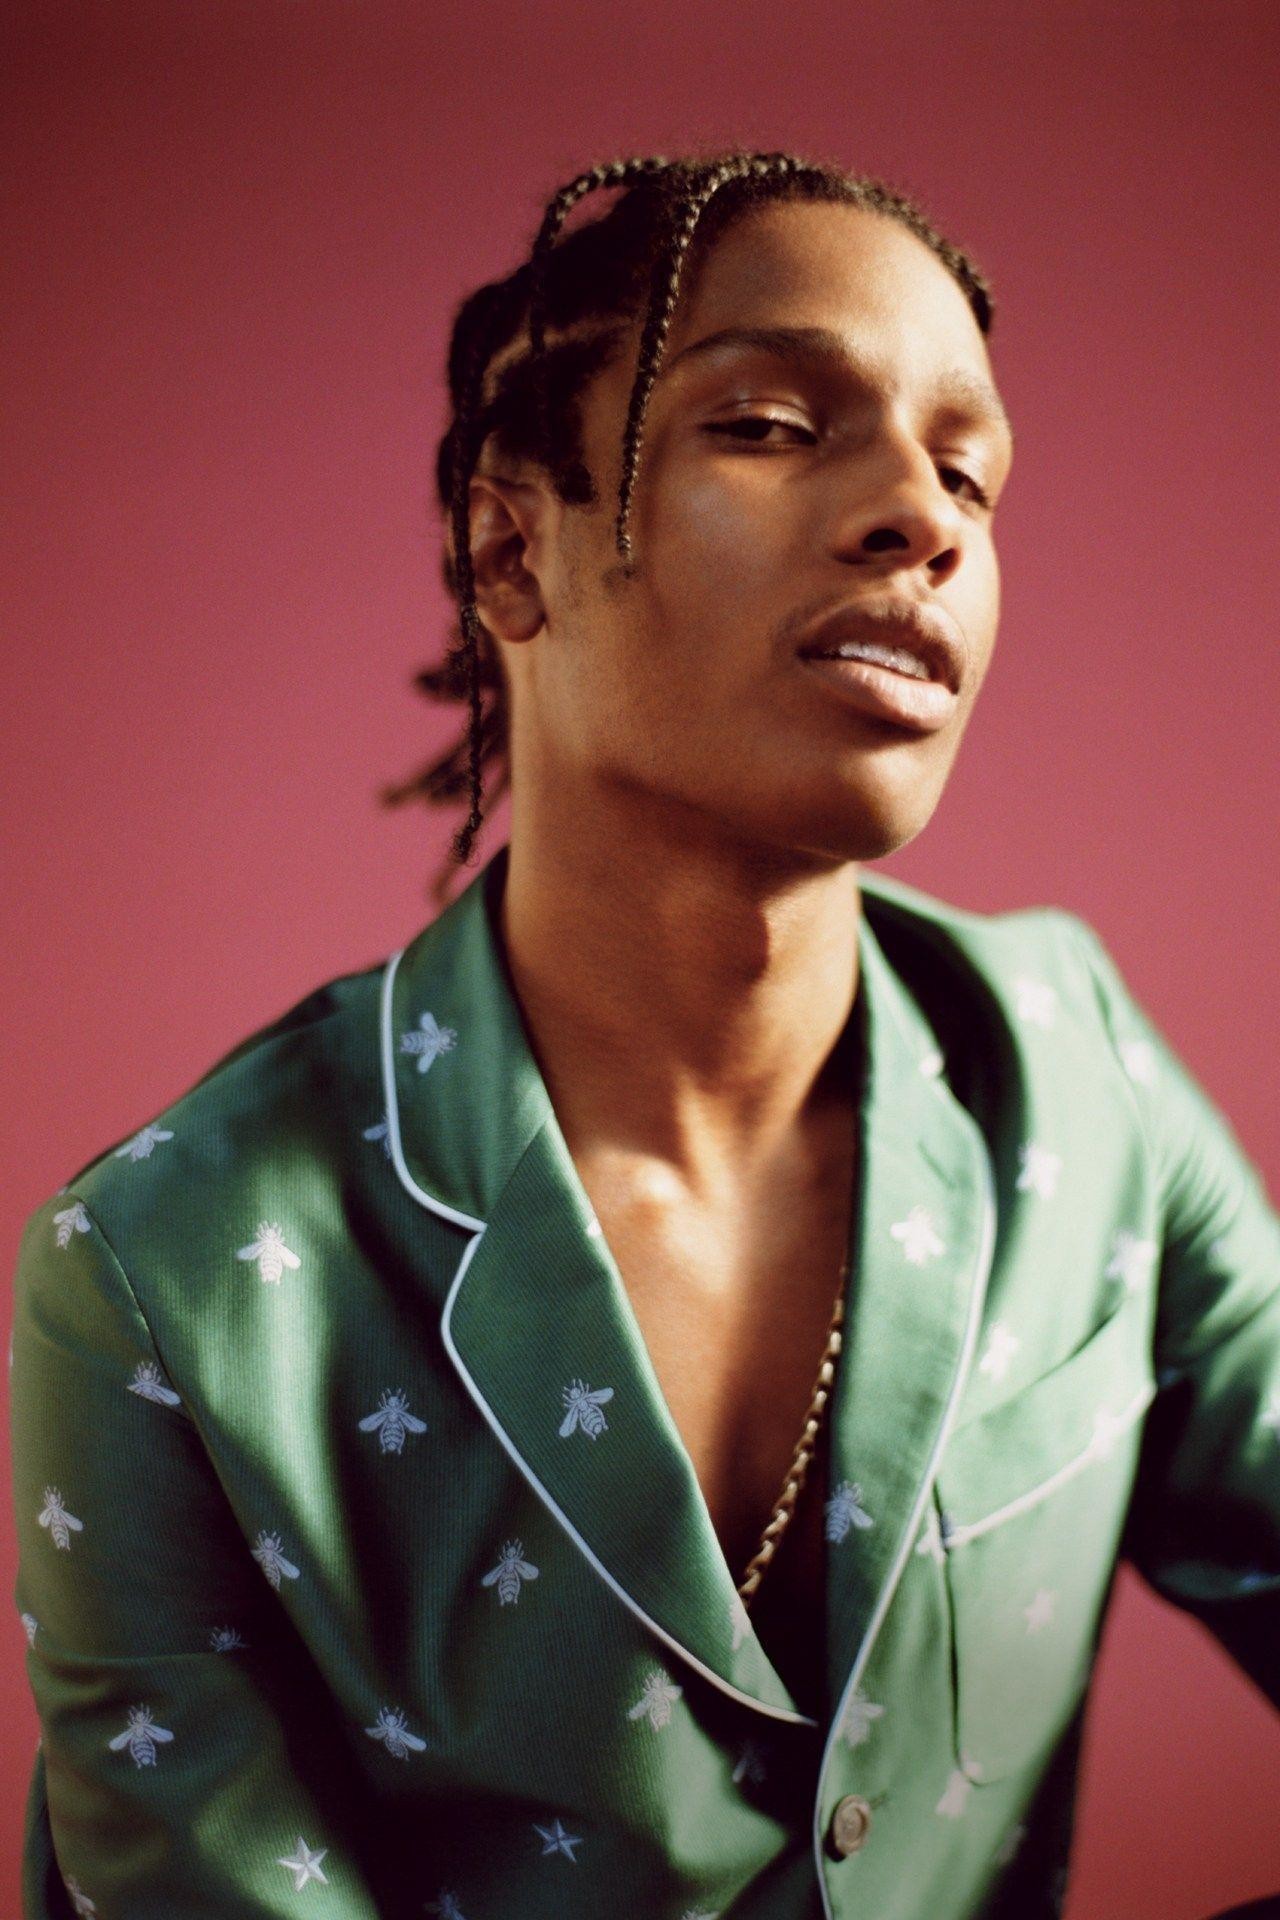 Asap Rocky Wallpapers For Iphone 7, Iphone 7 Plus, - Asap Rocky Wallpaper Iphone - HD Wallpaper 